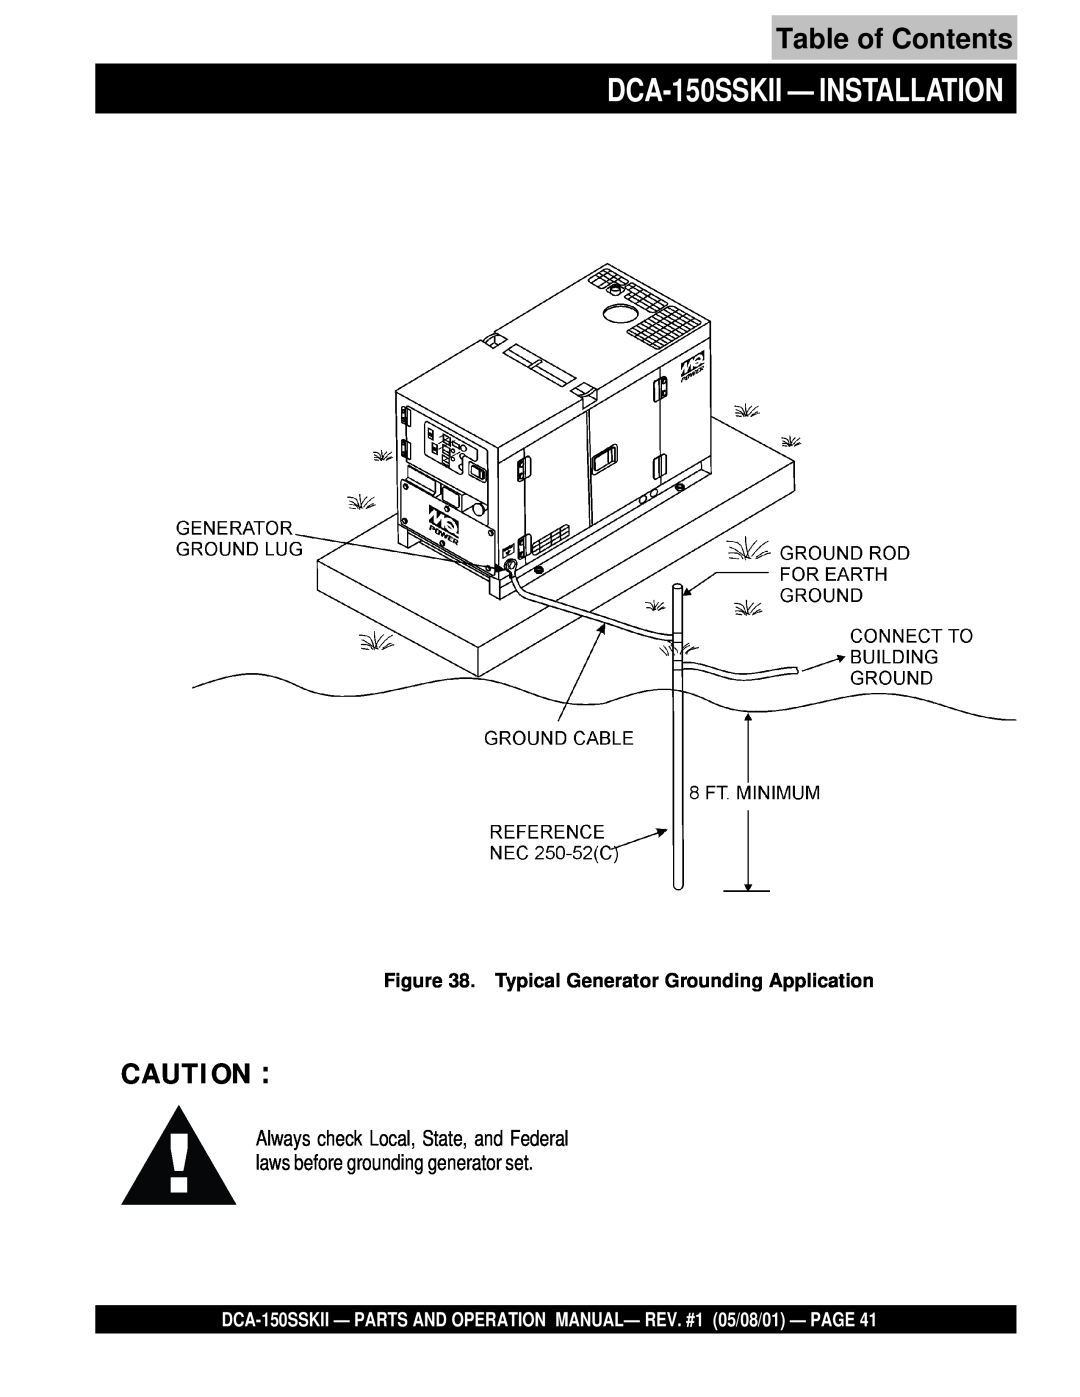 Multiquip operation manual DCA-150SSKII - INSTALLATION, Table of Contents, Typical Generator Grounding Application 